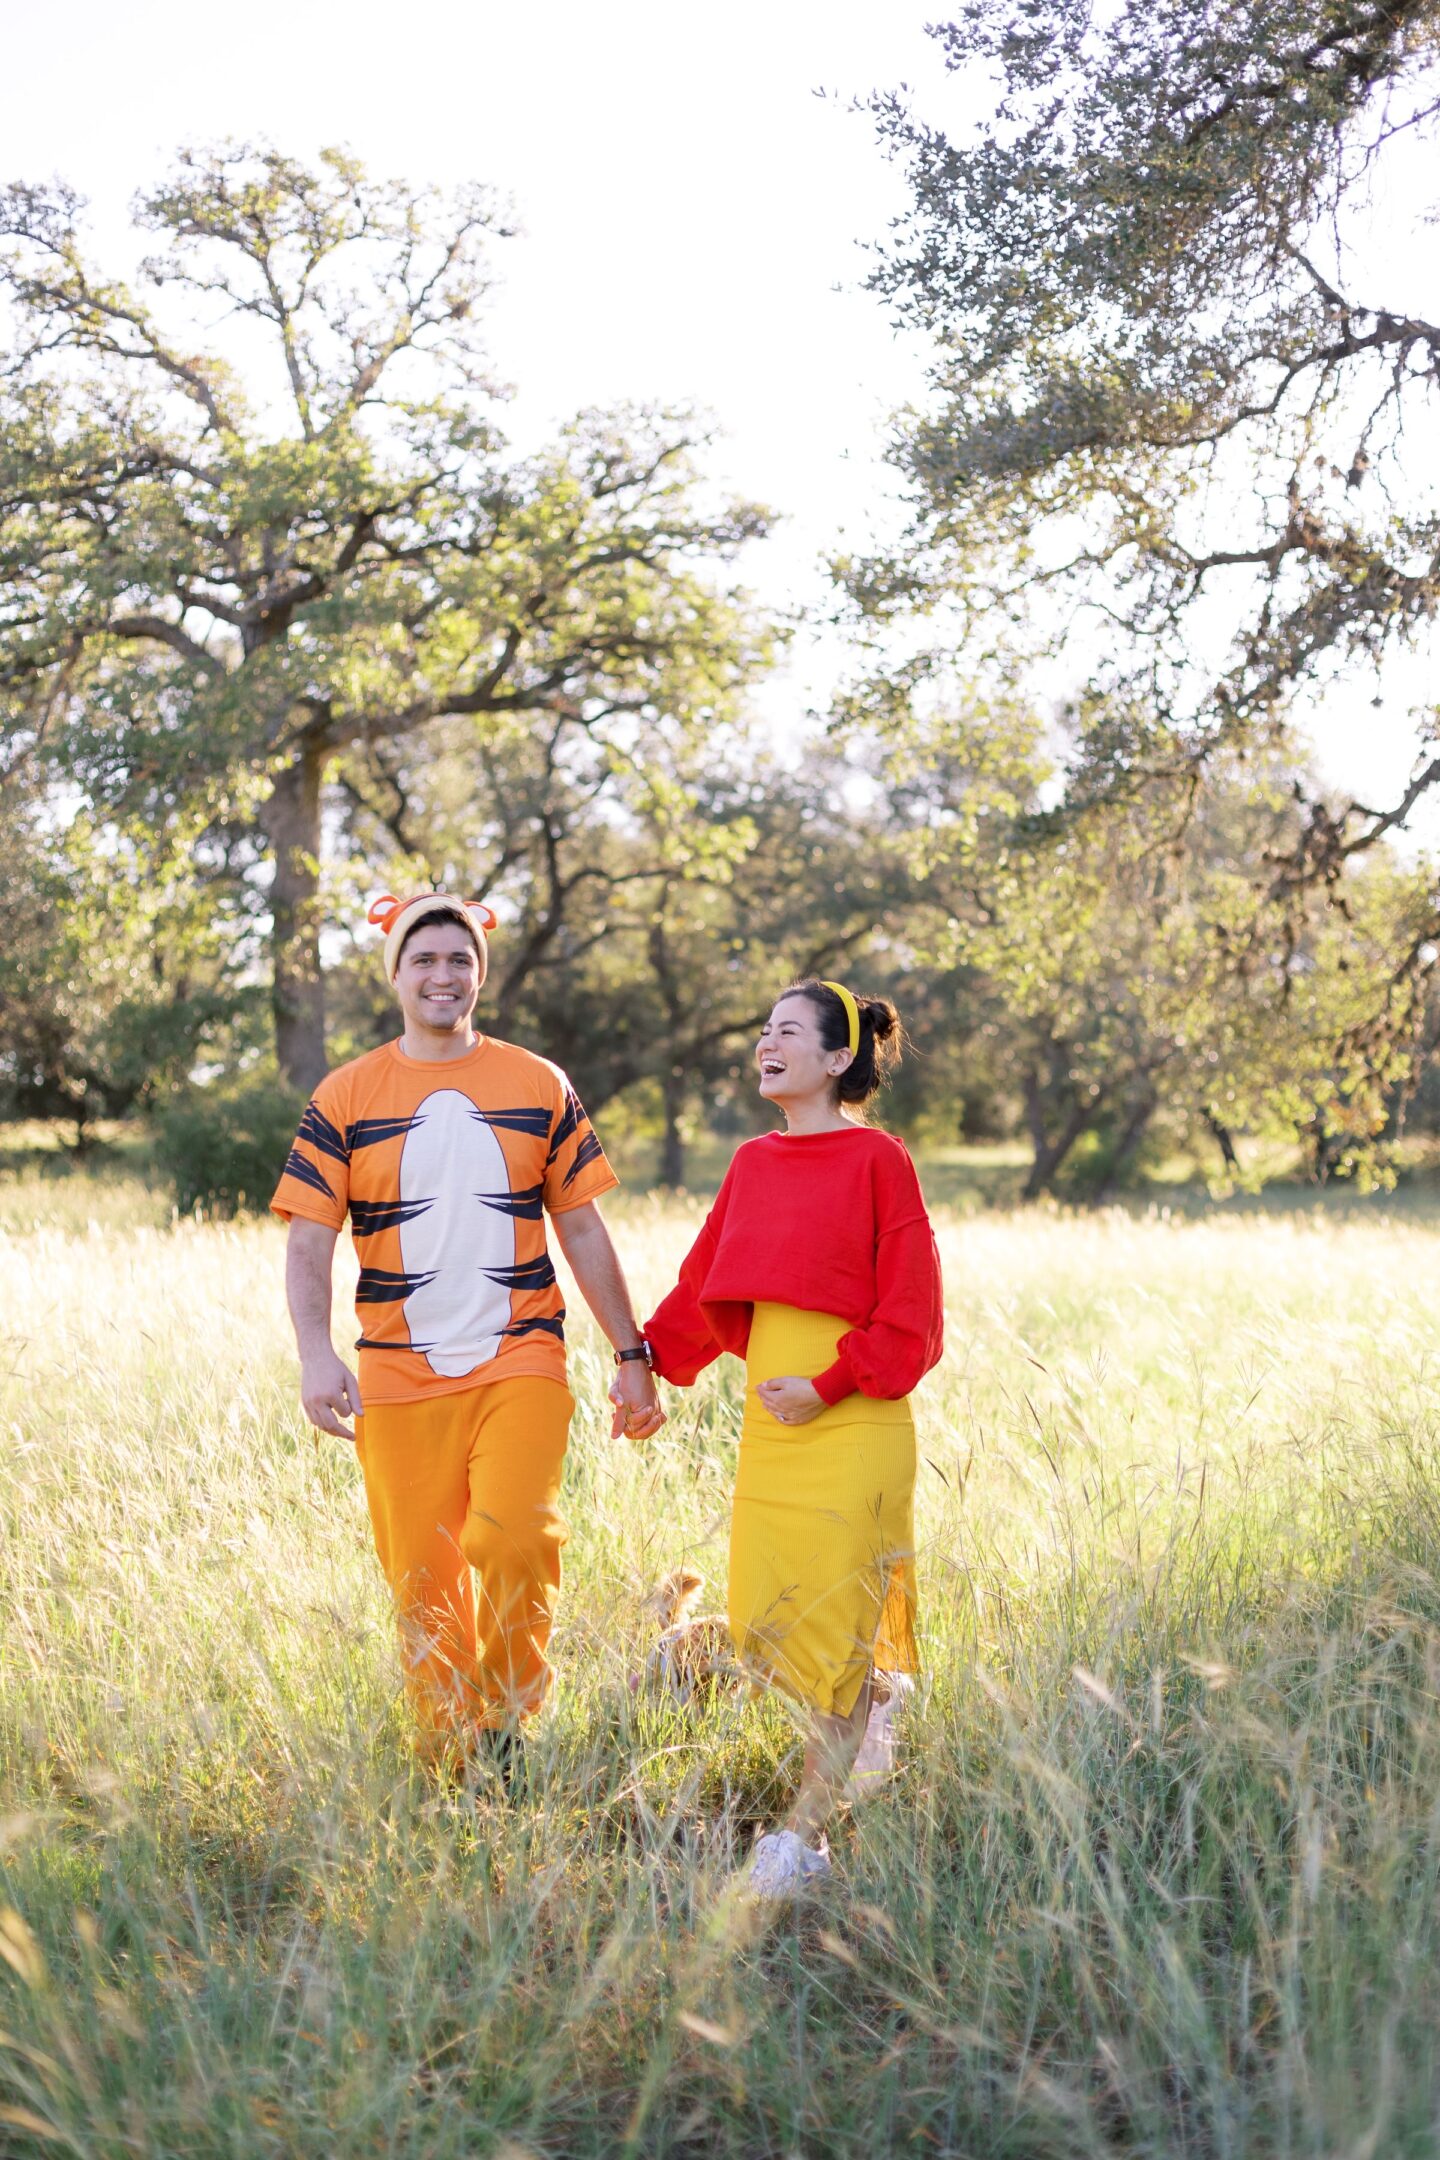 DIY Winnie The Pooh Couples Halloween Costume - with love caila